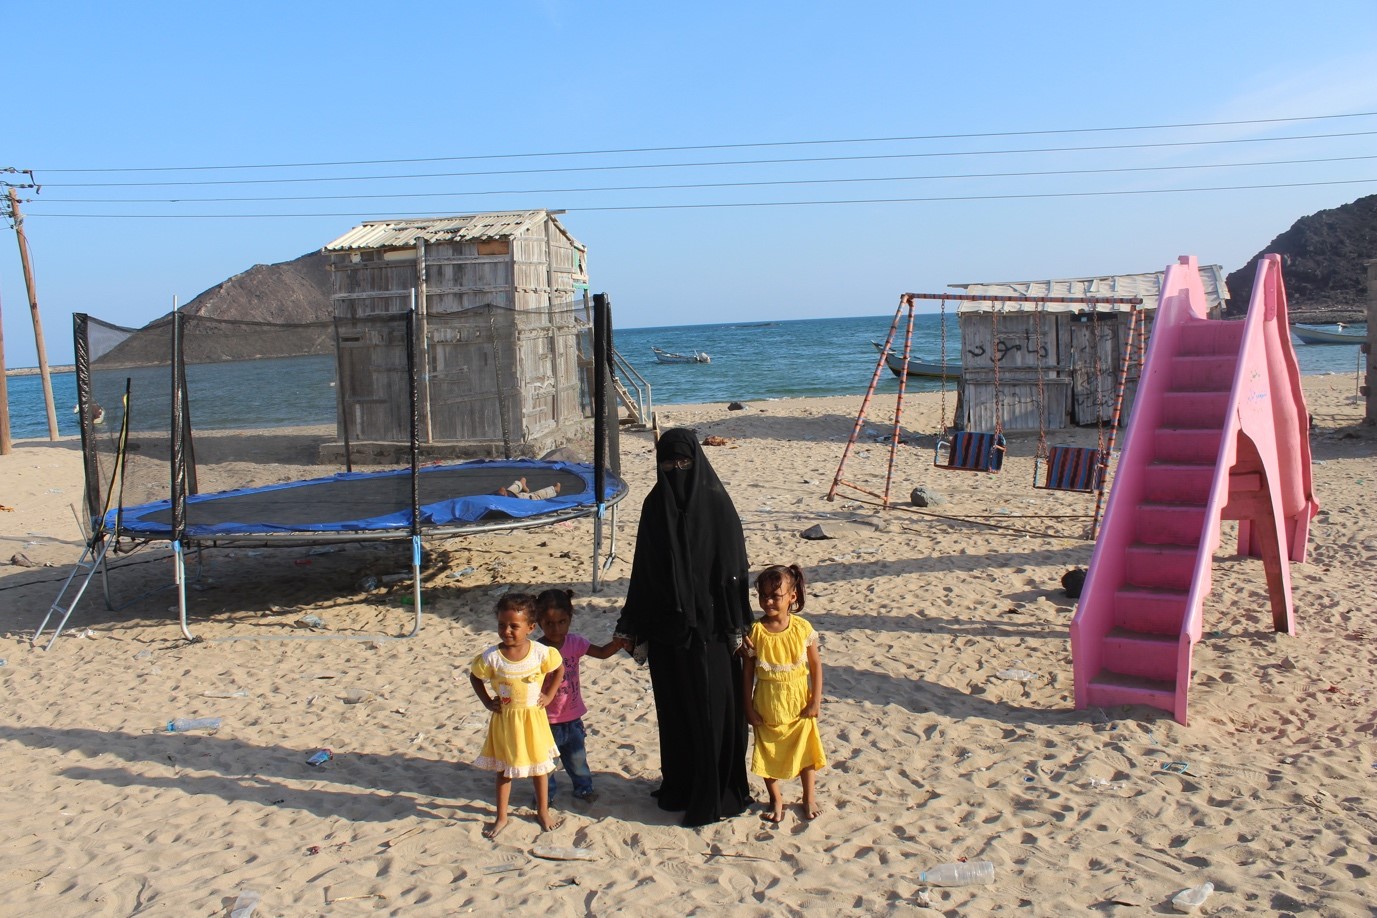 A woman and kids standing at a beach